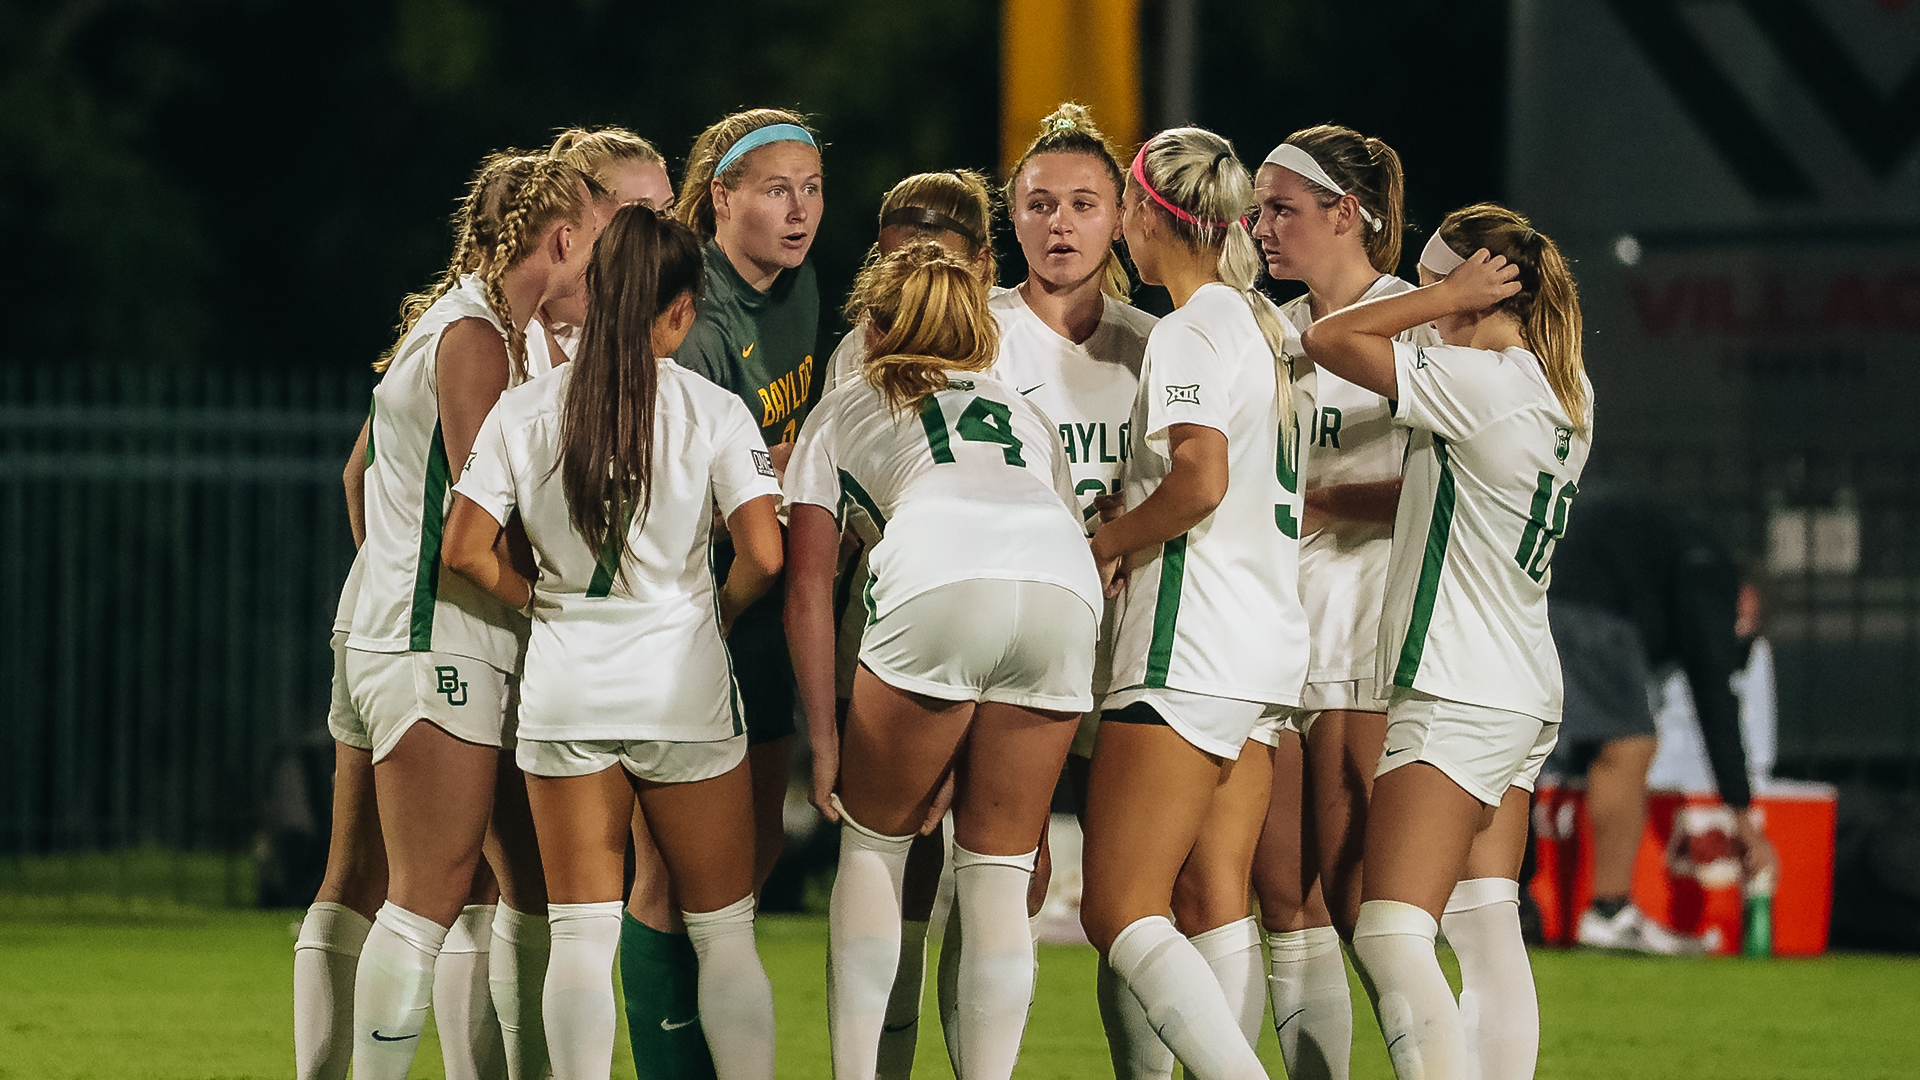 Still fighting for first win, soccer hosts another tough Big 12 team in